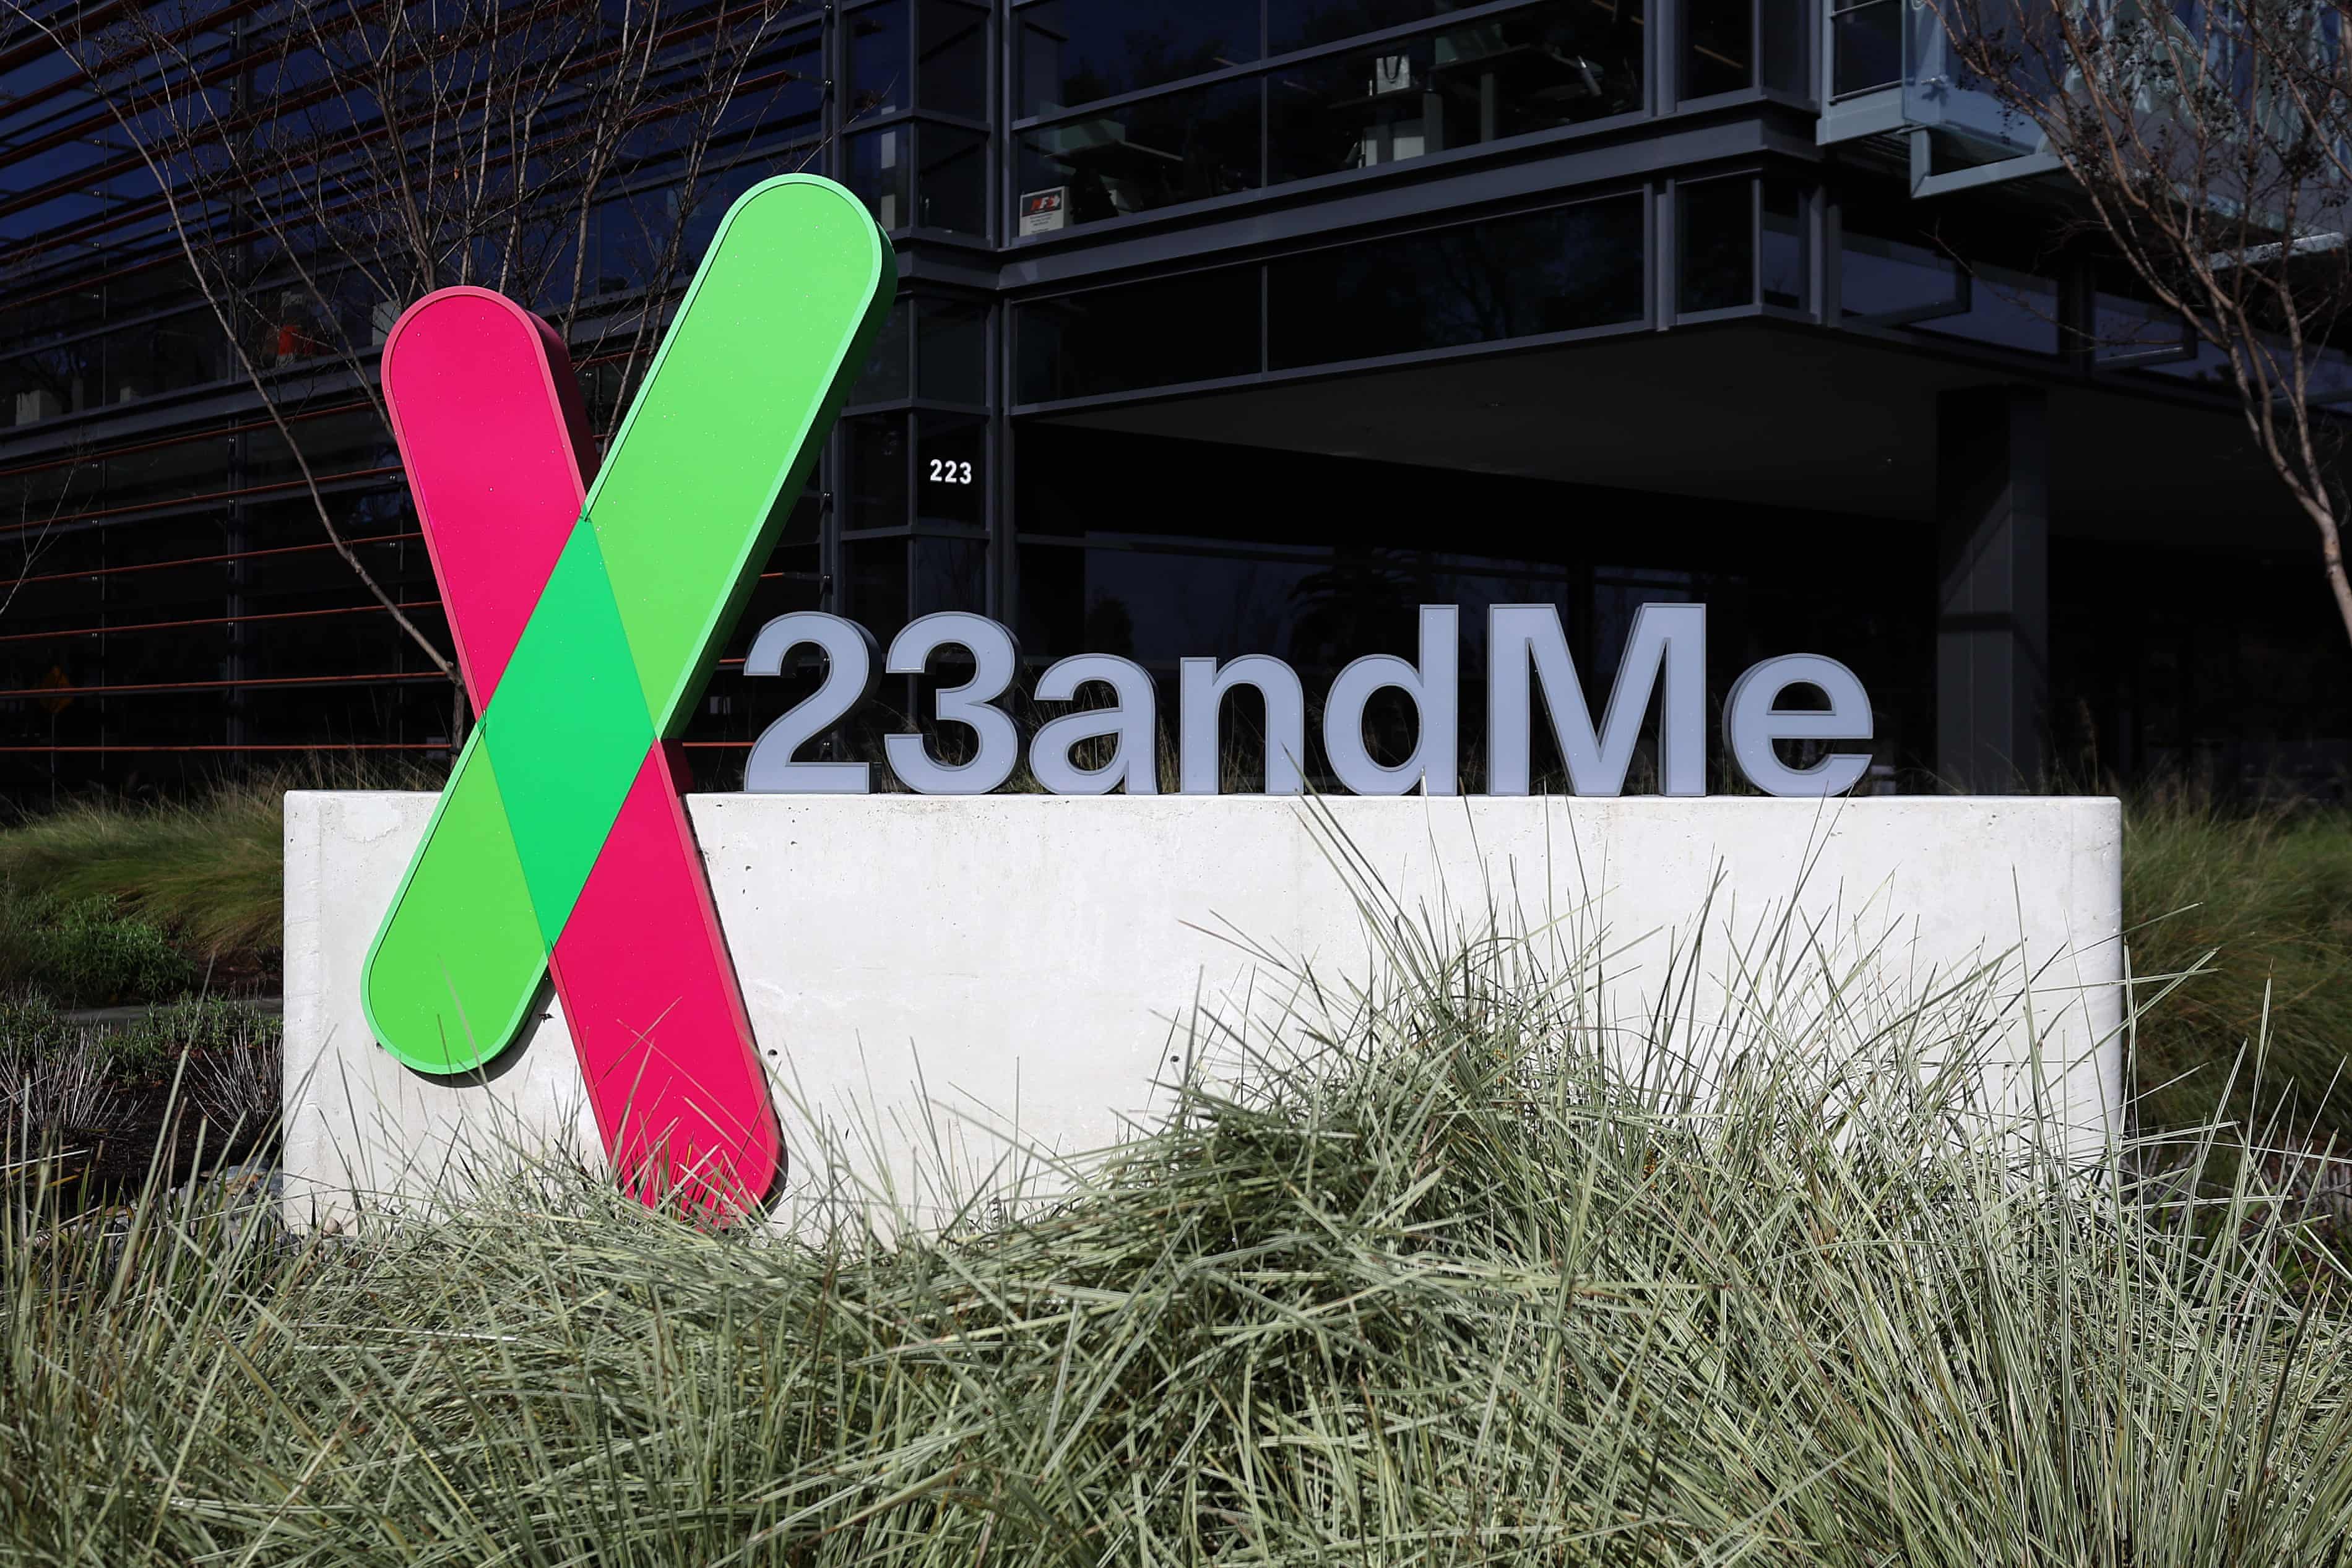 Hackers got nearly 7 million people’s data from 23andMe. The firm blamed users in ‘very dumb’ move (theguardian.com)